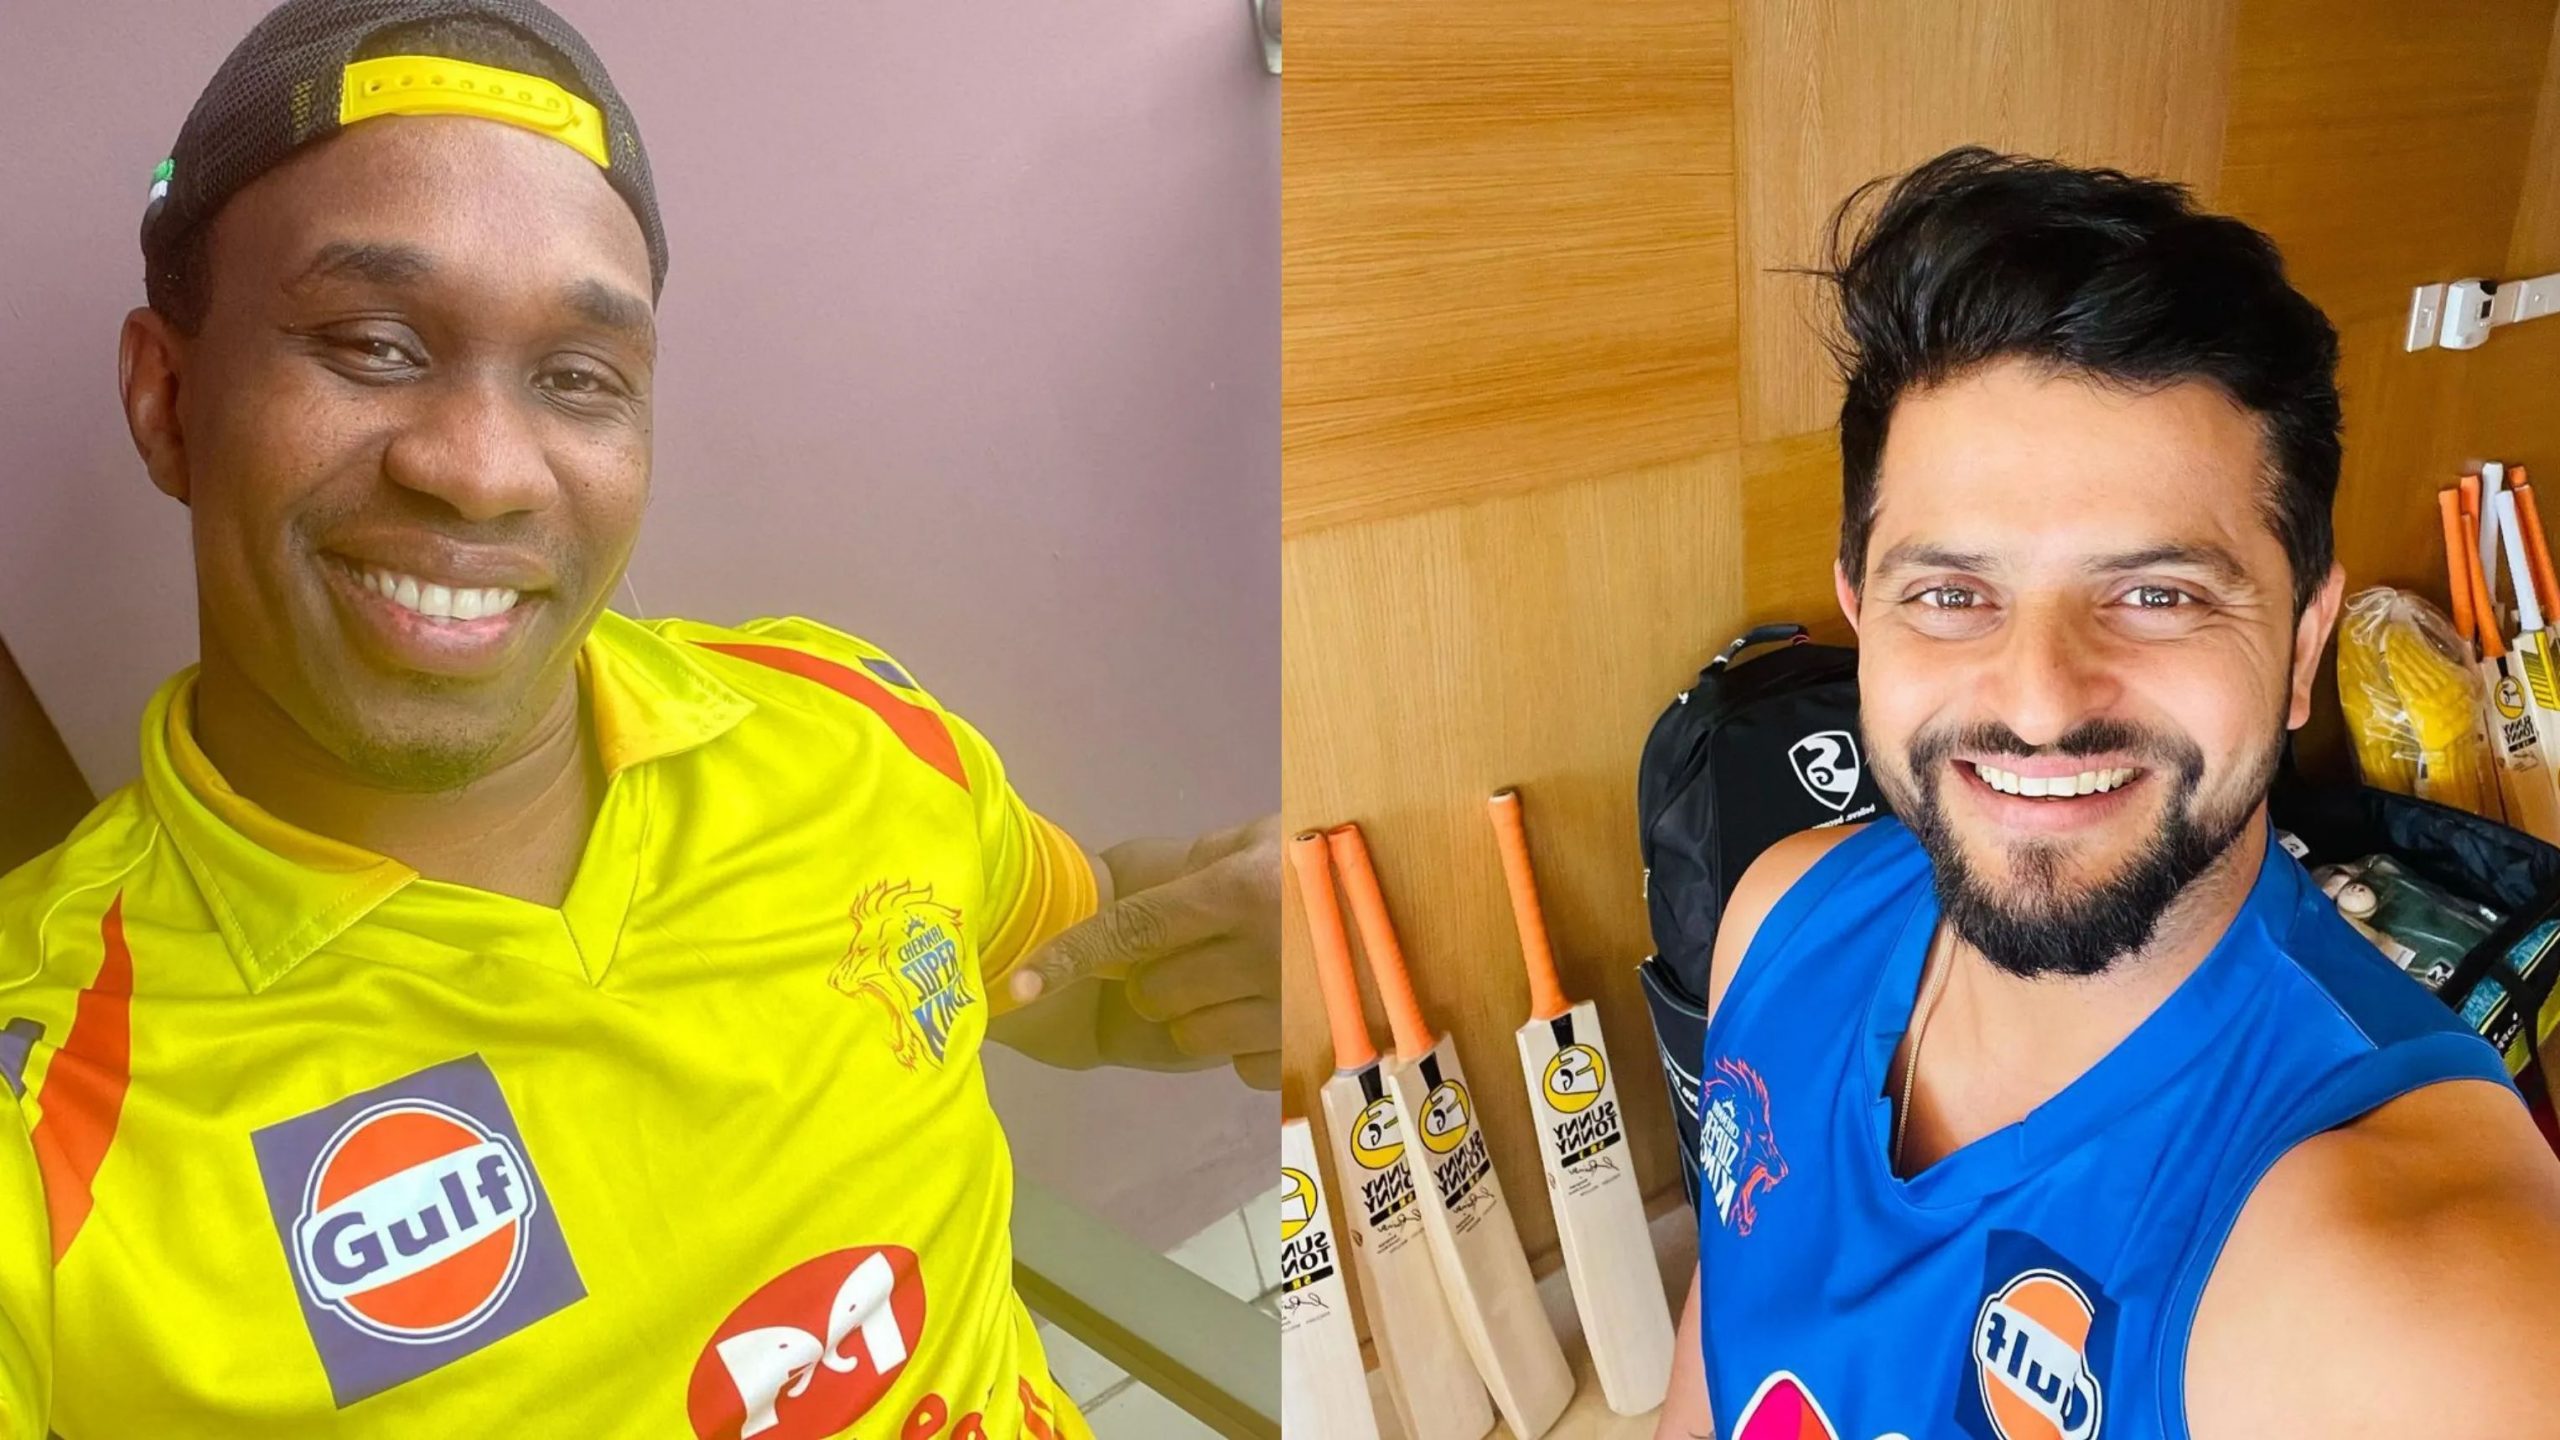 IPL 2021: What is Suresh Raina famously known as among Chennai Super Kings fans?